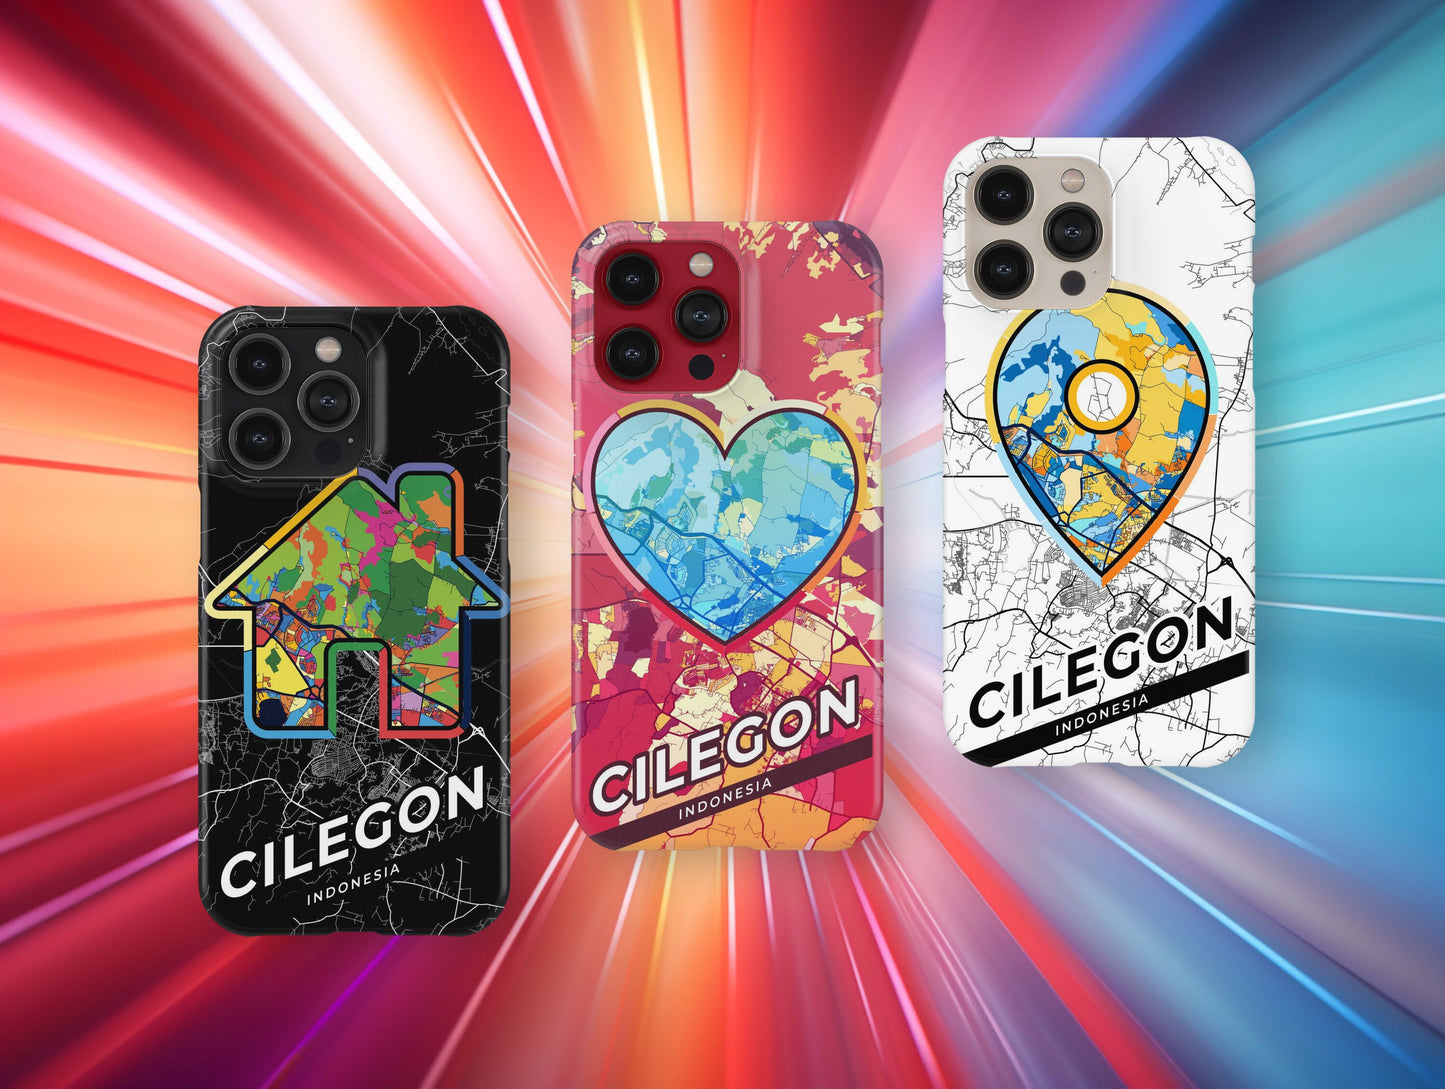 Cilegon Indonesia slim phone case with colorful icon. Birthday, wedding or housewarming gift. Couple match cases.